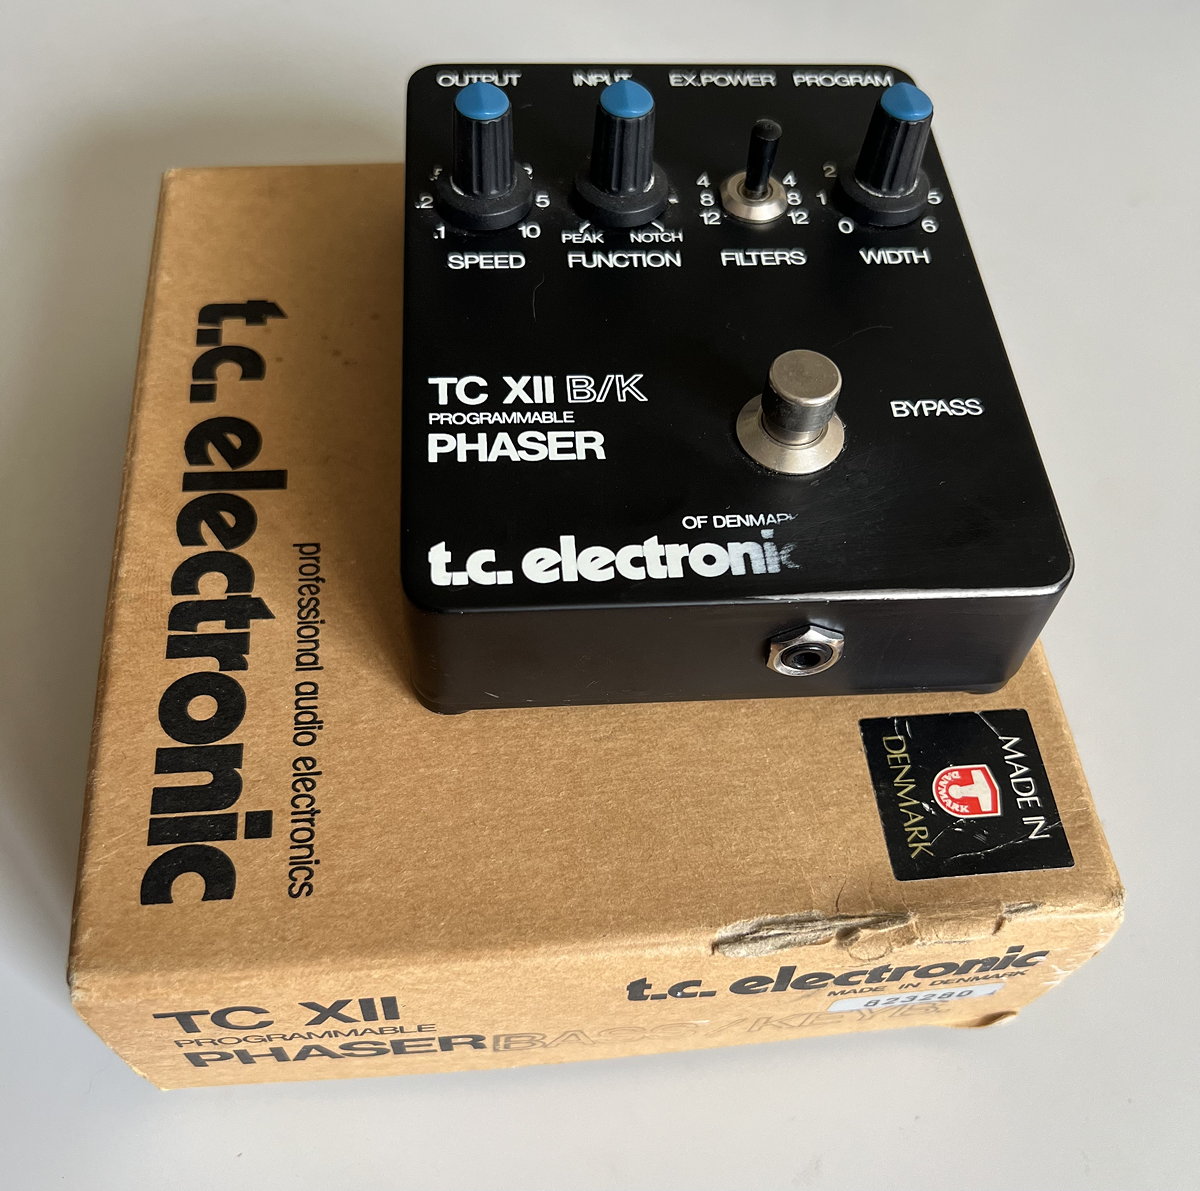 T.C. Electronics TC XII B/K programmable Phaser front view